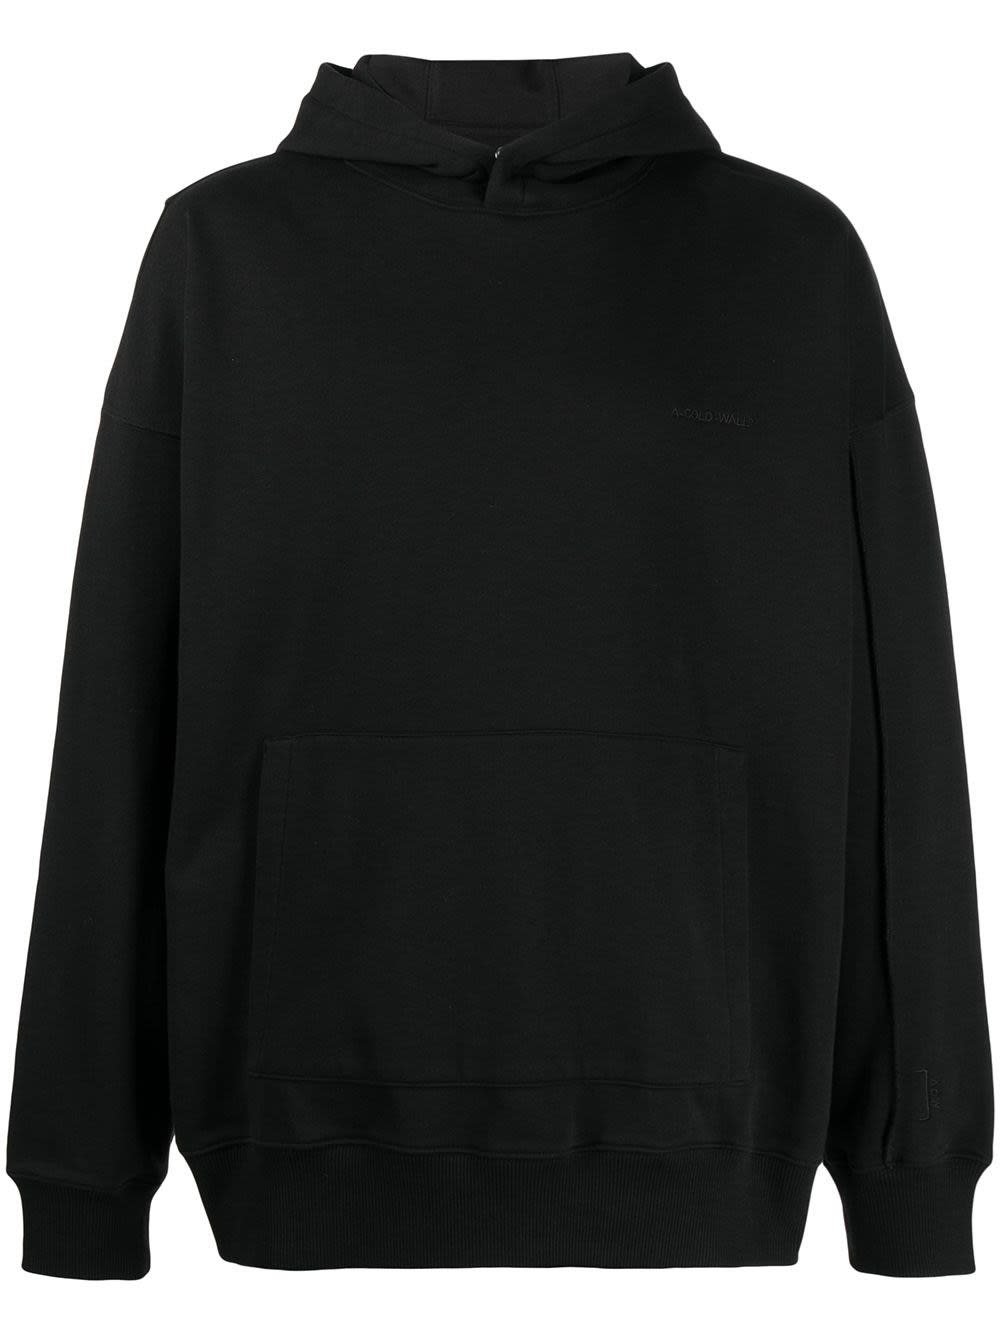 A-COLD-WALL Dissection Hoodie In Black Jersey